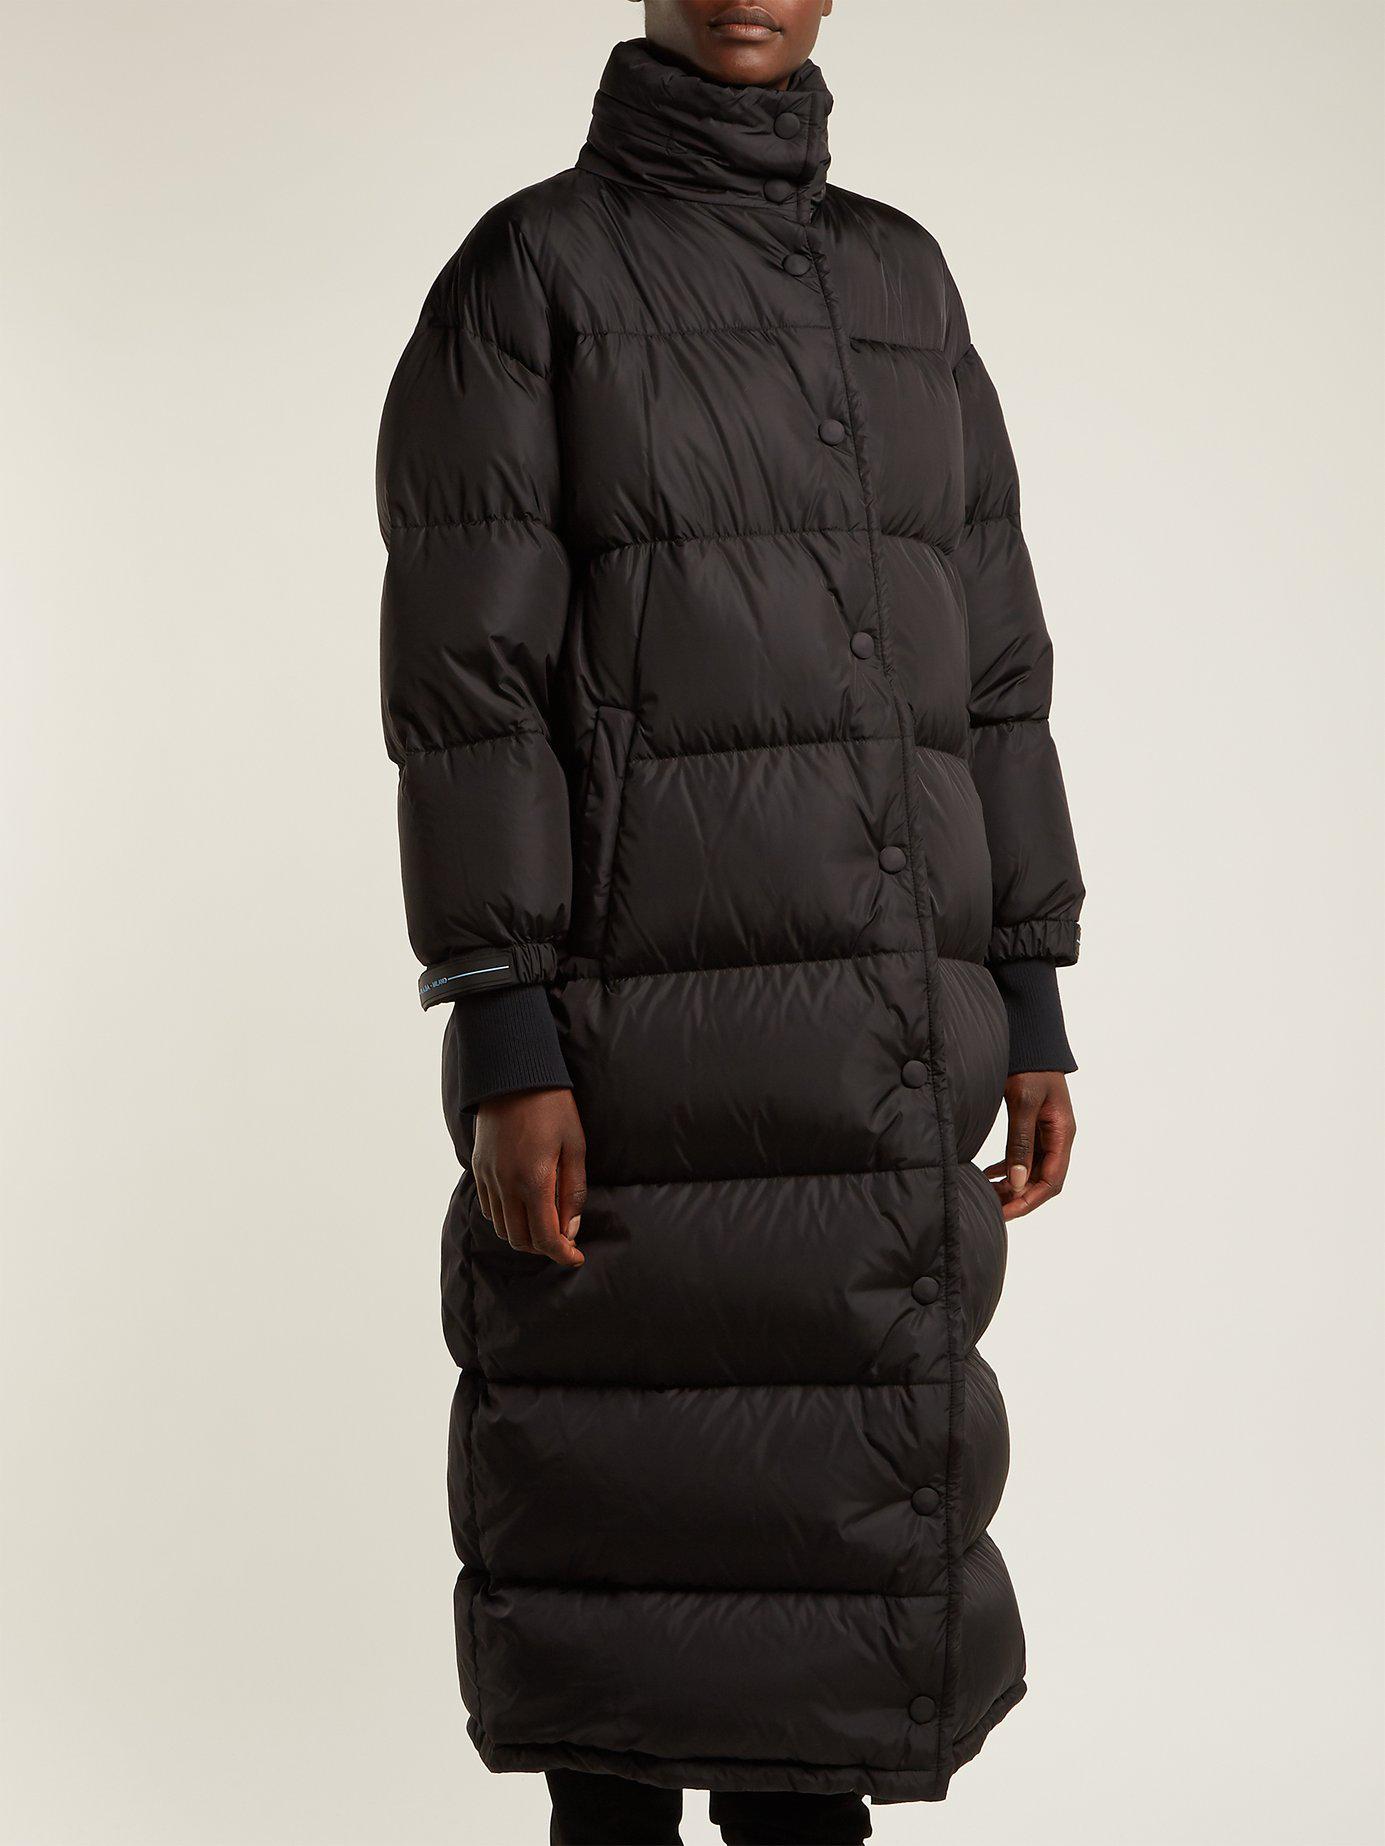 Prada Rubber Long Quilted Down Coat in Black - Lyst